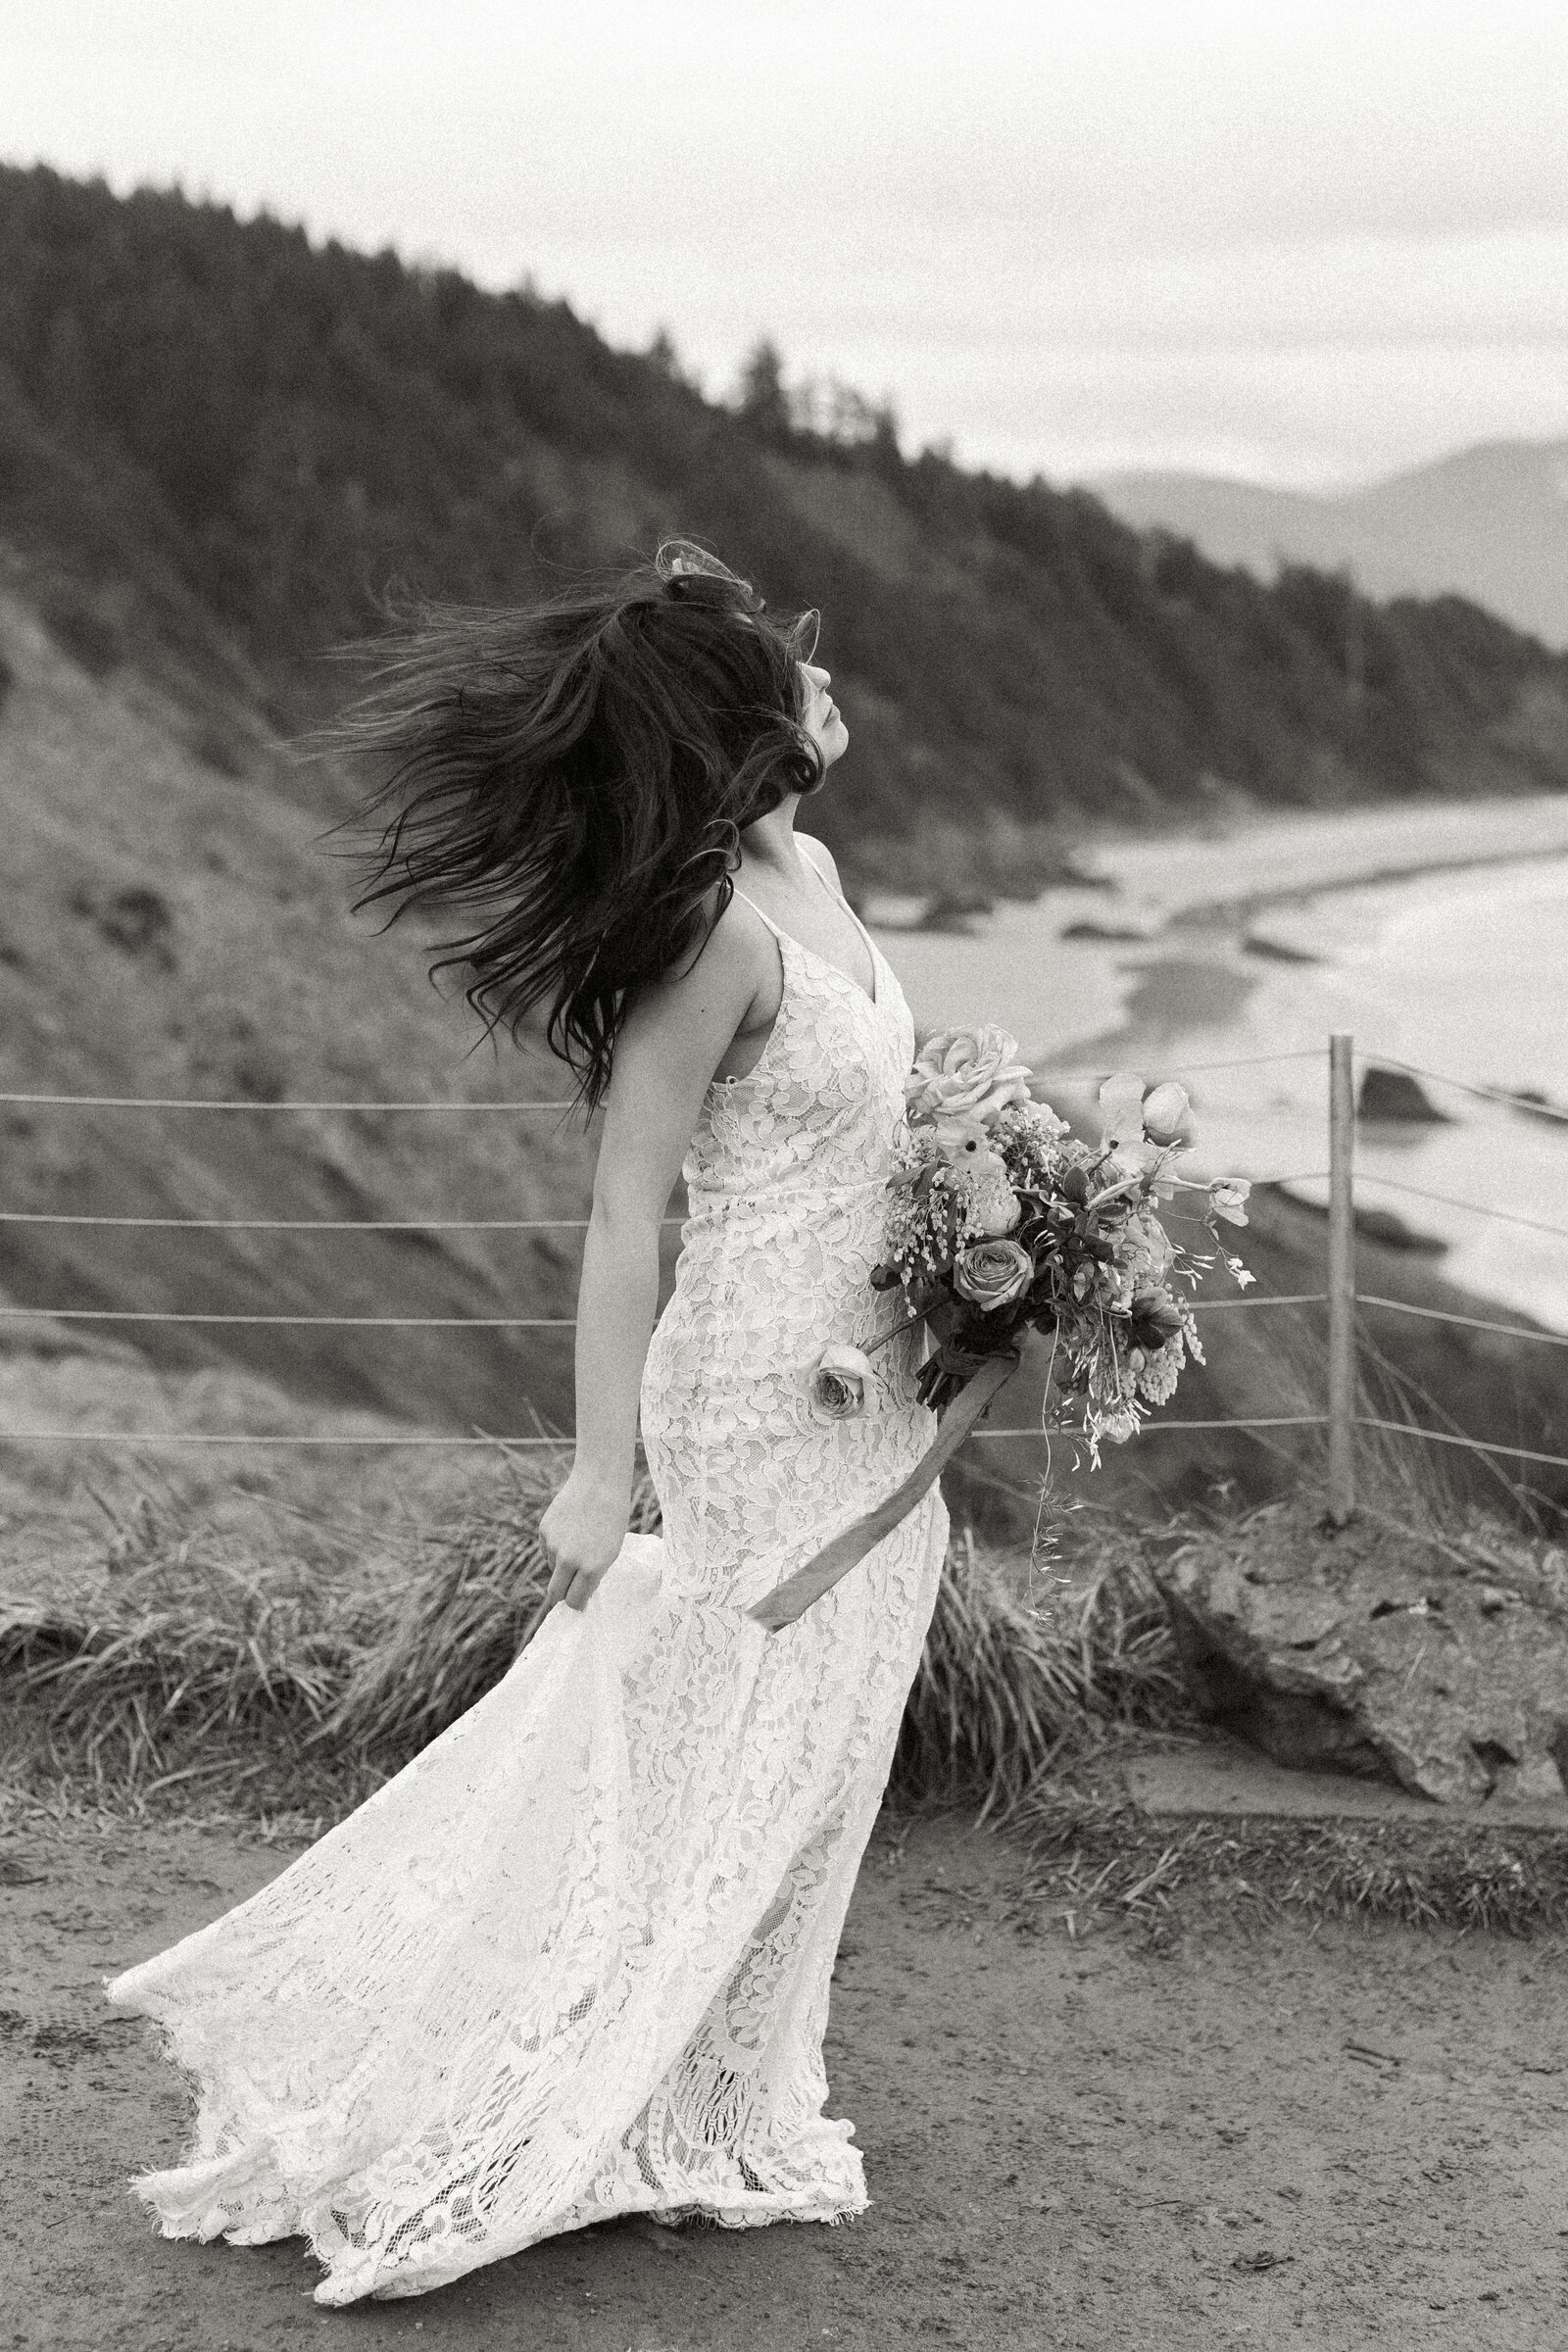 Bride's hair is blown away by the wind and creates movement